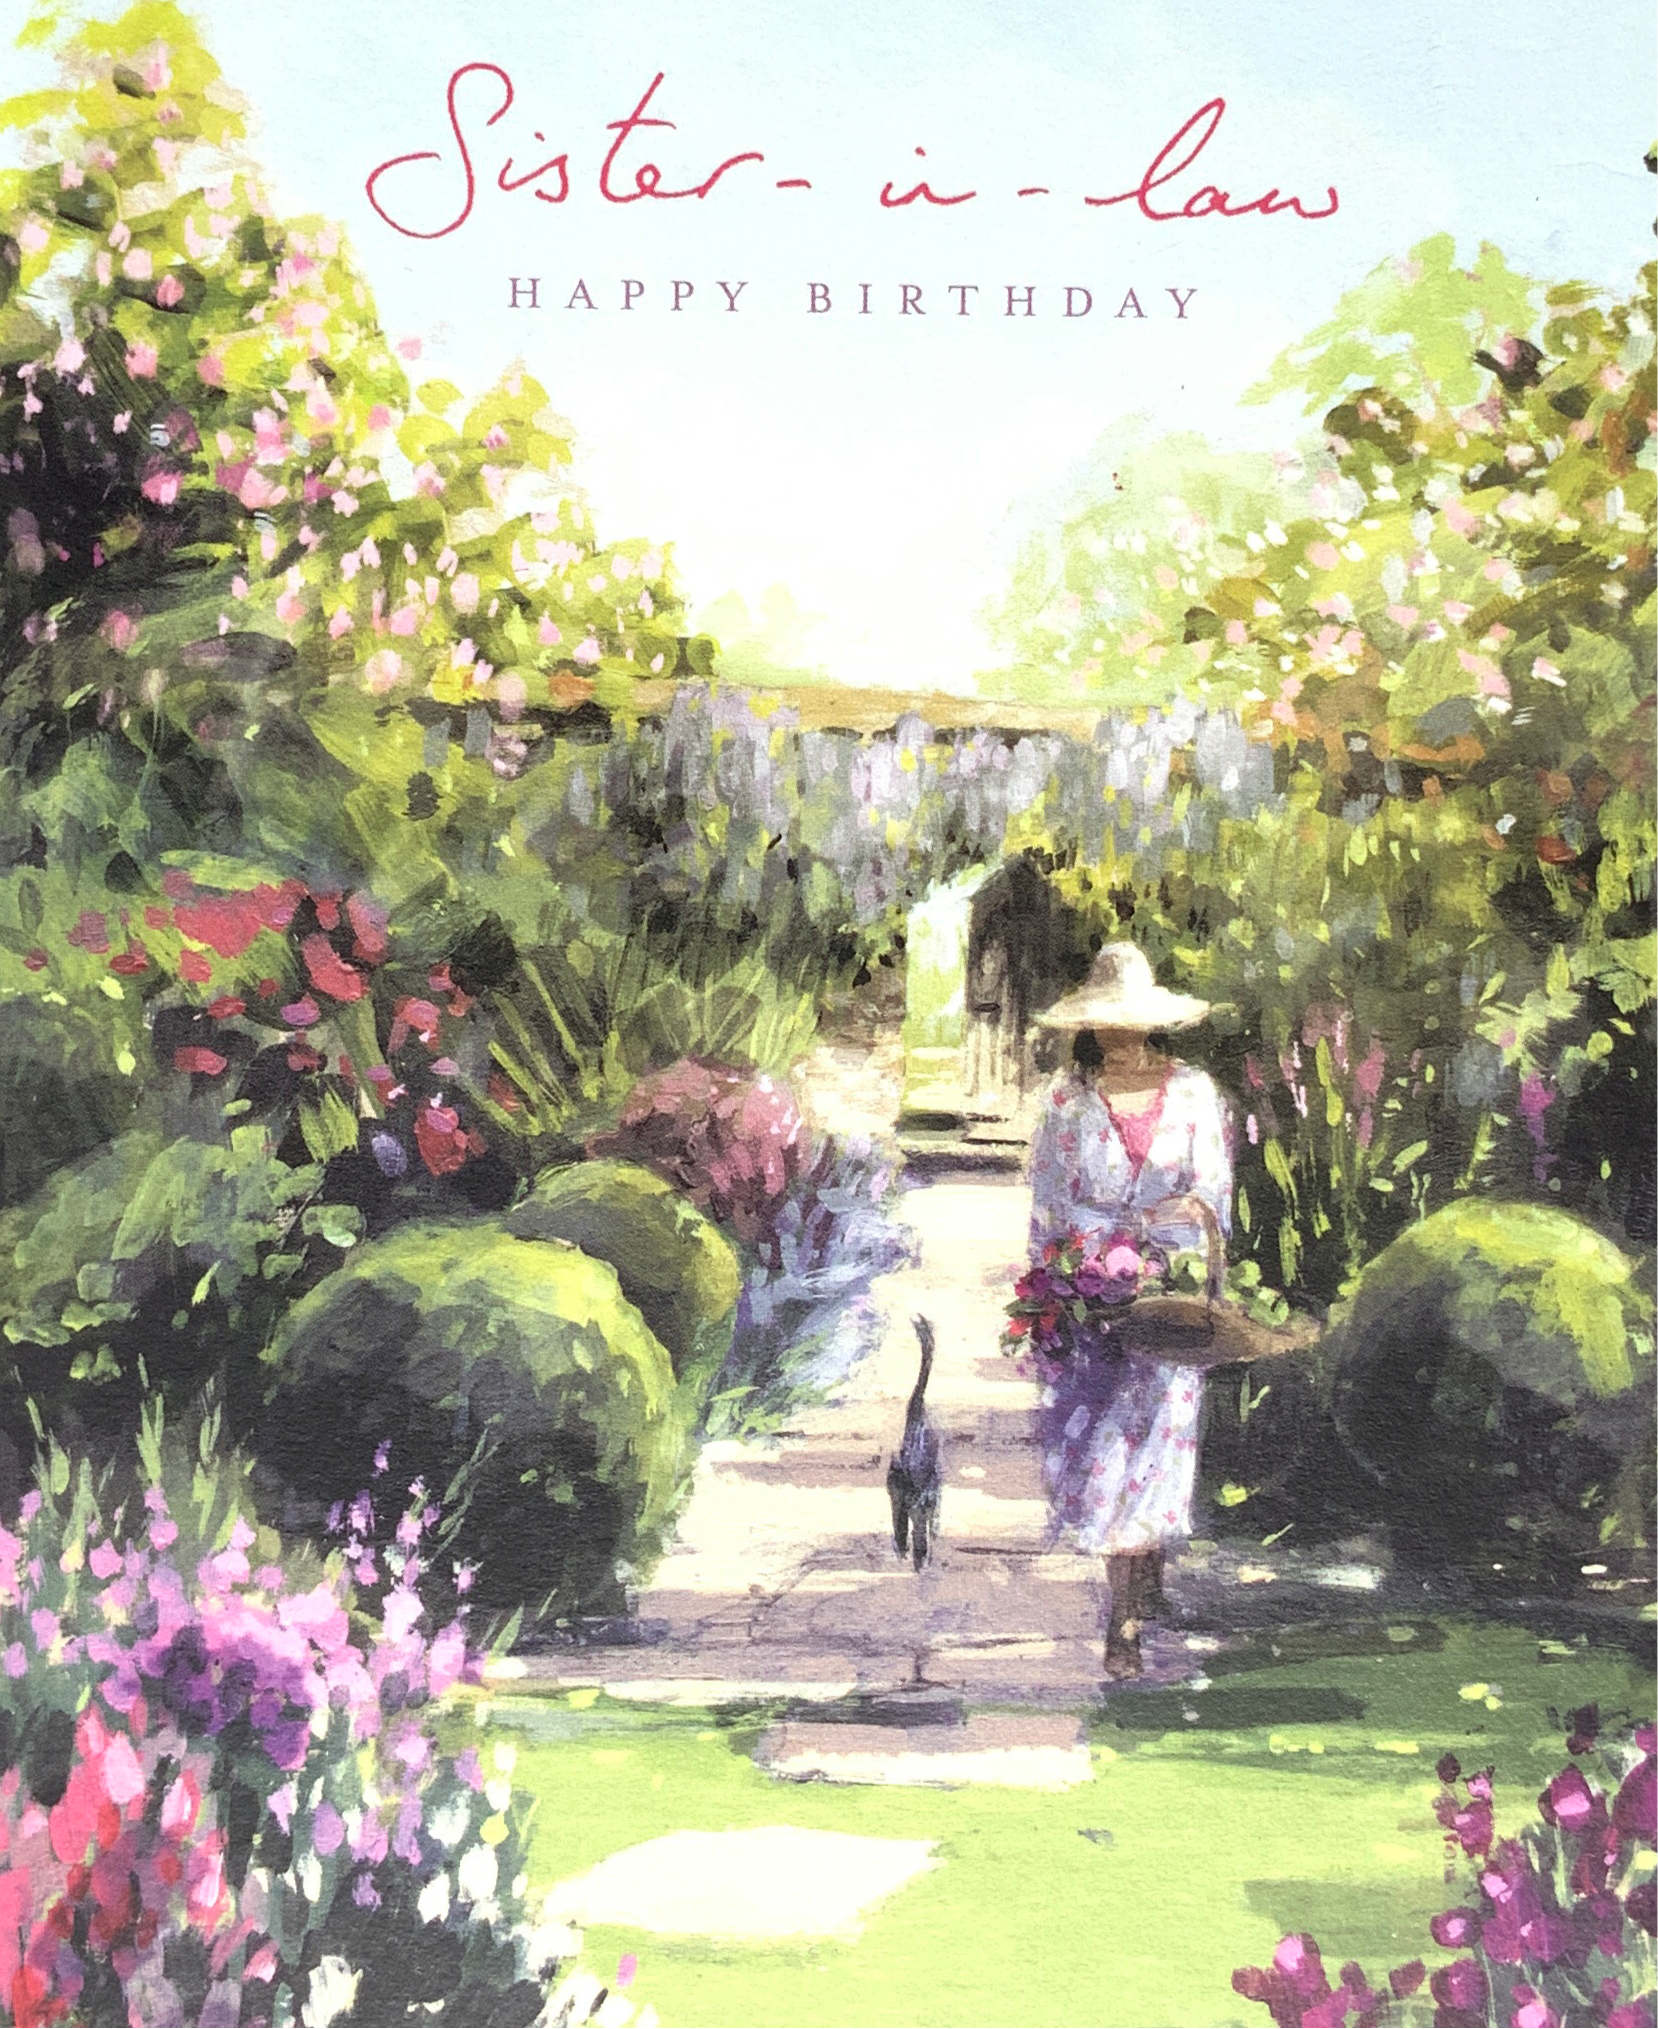 Birthday Card - Sister-in-Law / A Lady Picking The Flowers & A Cat